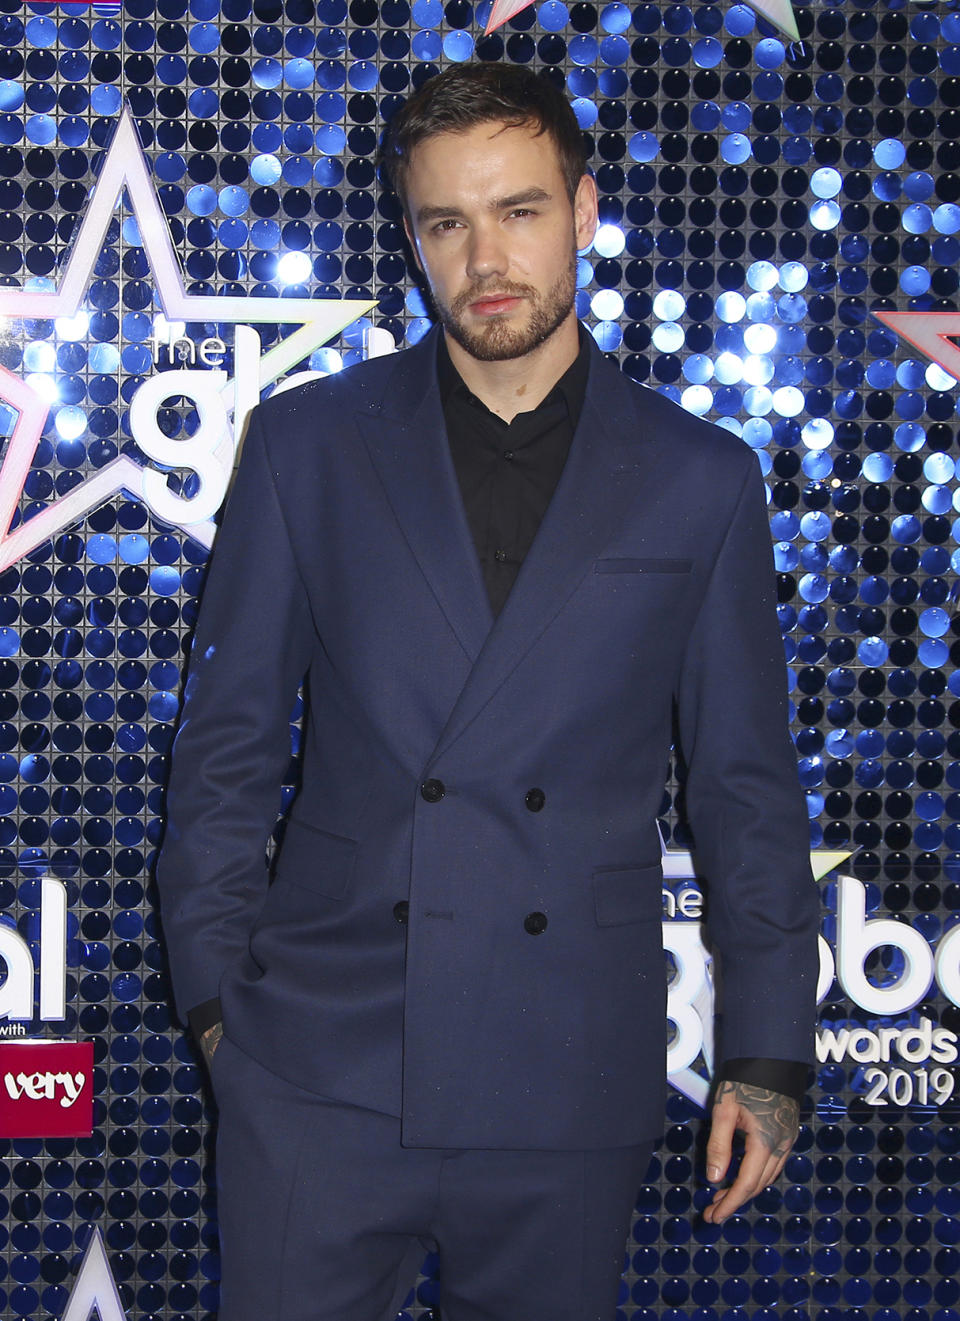 FILE - In this March 7, 2019, file photo, former One Direction singer Liam Payne arrives at the Global Gift Gala in London. The coronavirus has halted many plans in the music industry but it didn’t stop Grammy-nominated DJ-producer Alesso and Payne from filming a music video for the new dance song “Midnight,” released on Wednesday. (Photo by Joel C Ryan/Invision/AP, File)